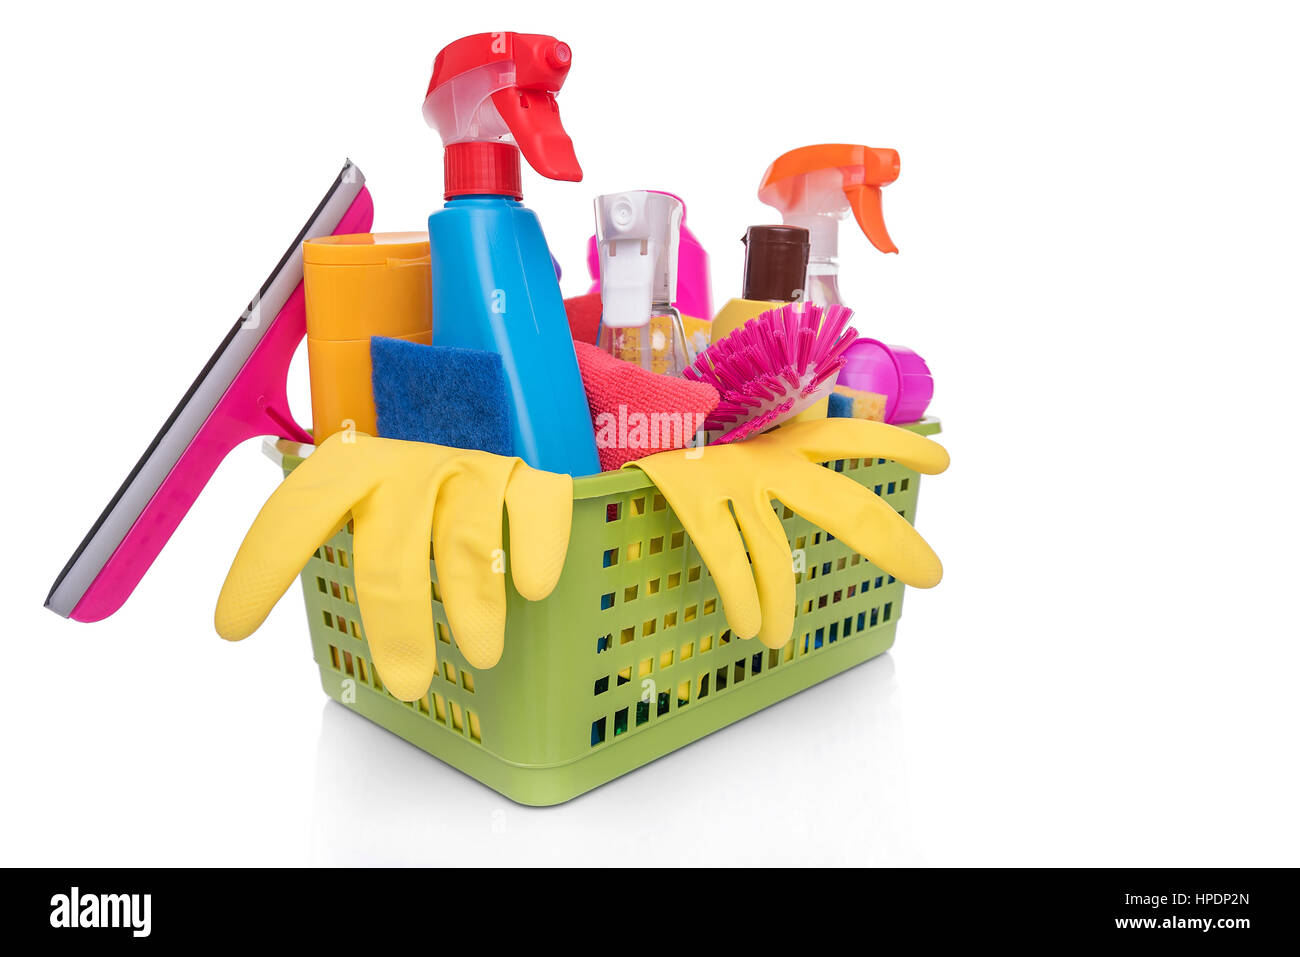 https://c8.alamy.com/comp/HPDP2N/basket-with-household-cleaning-products-isolated-on-white-background-HPDP2N.jpg